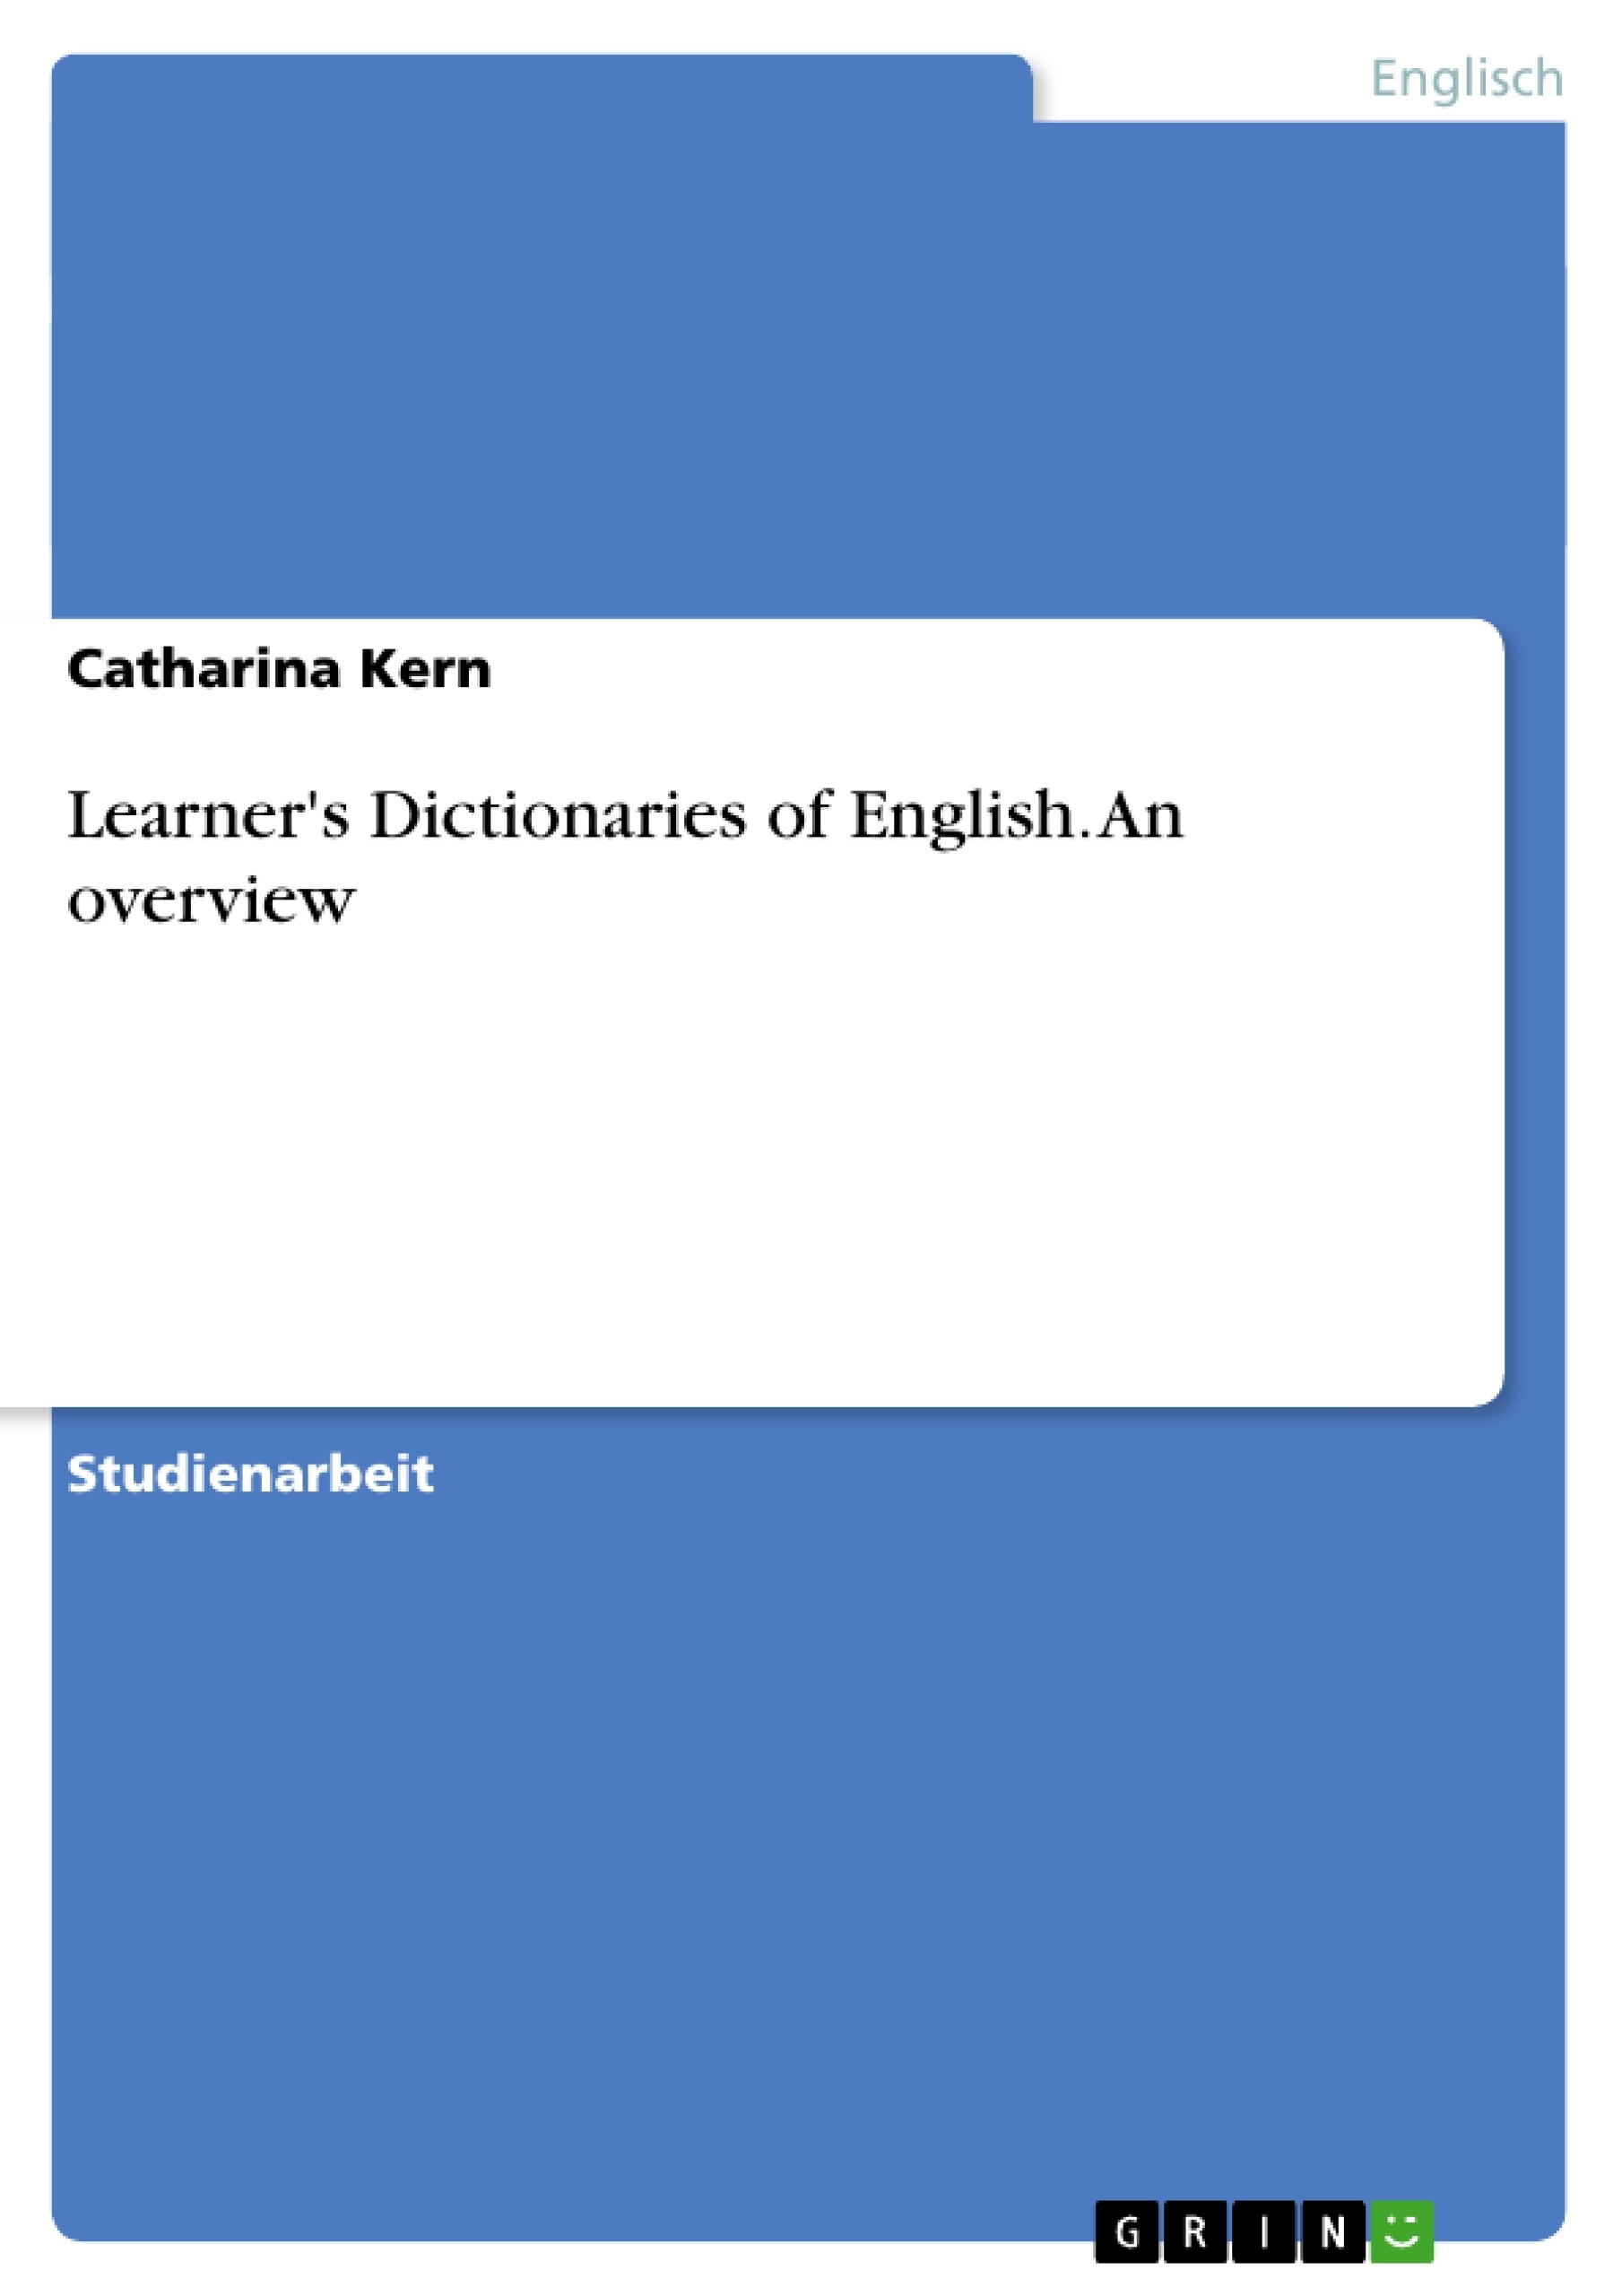 Titel: Learner's Dictionaries of English. An overview